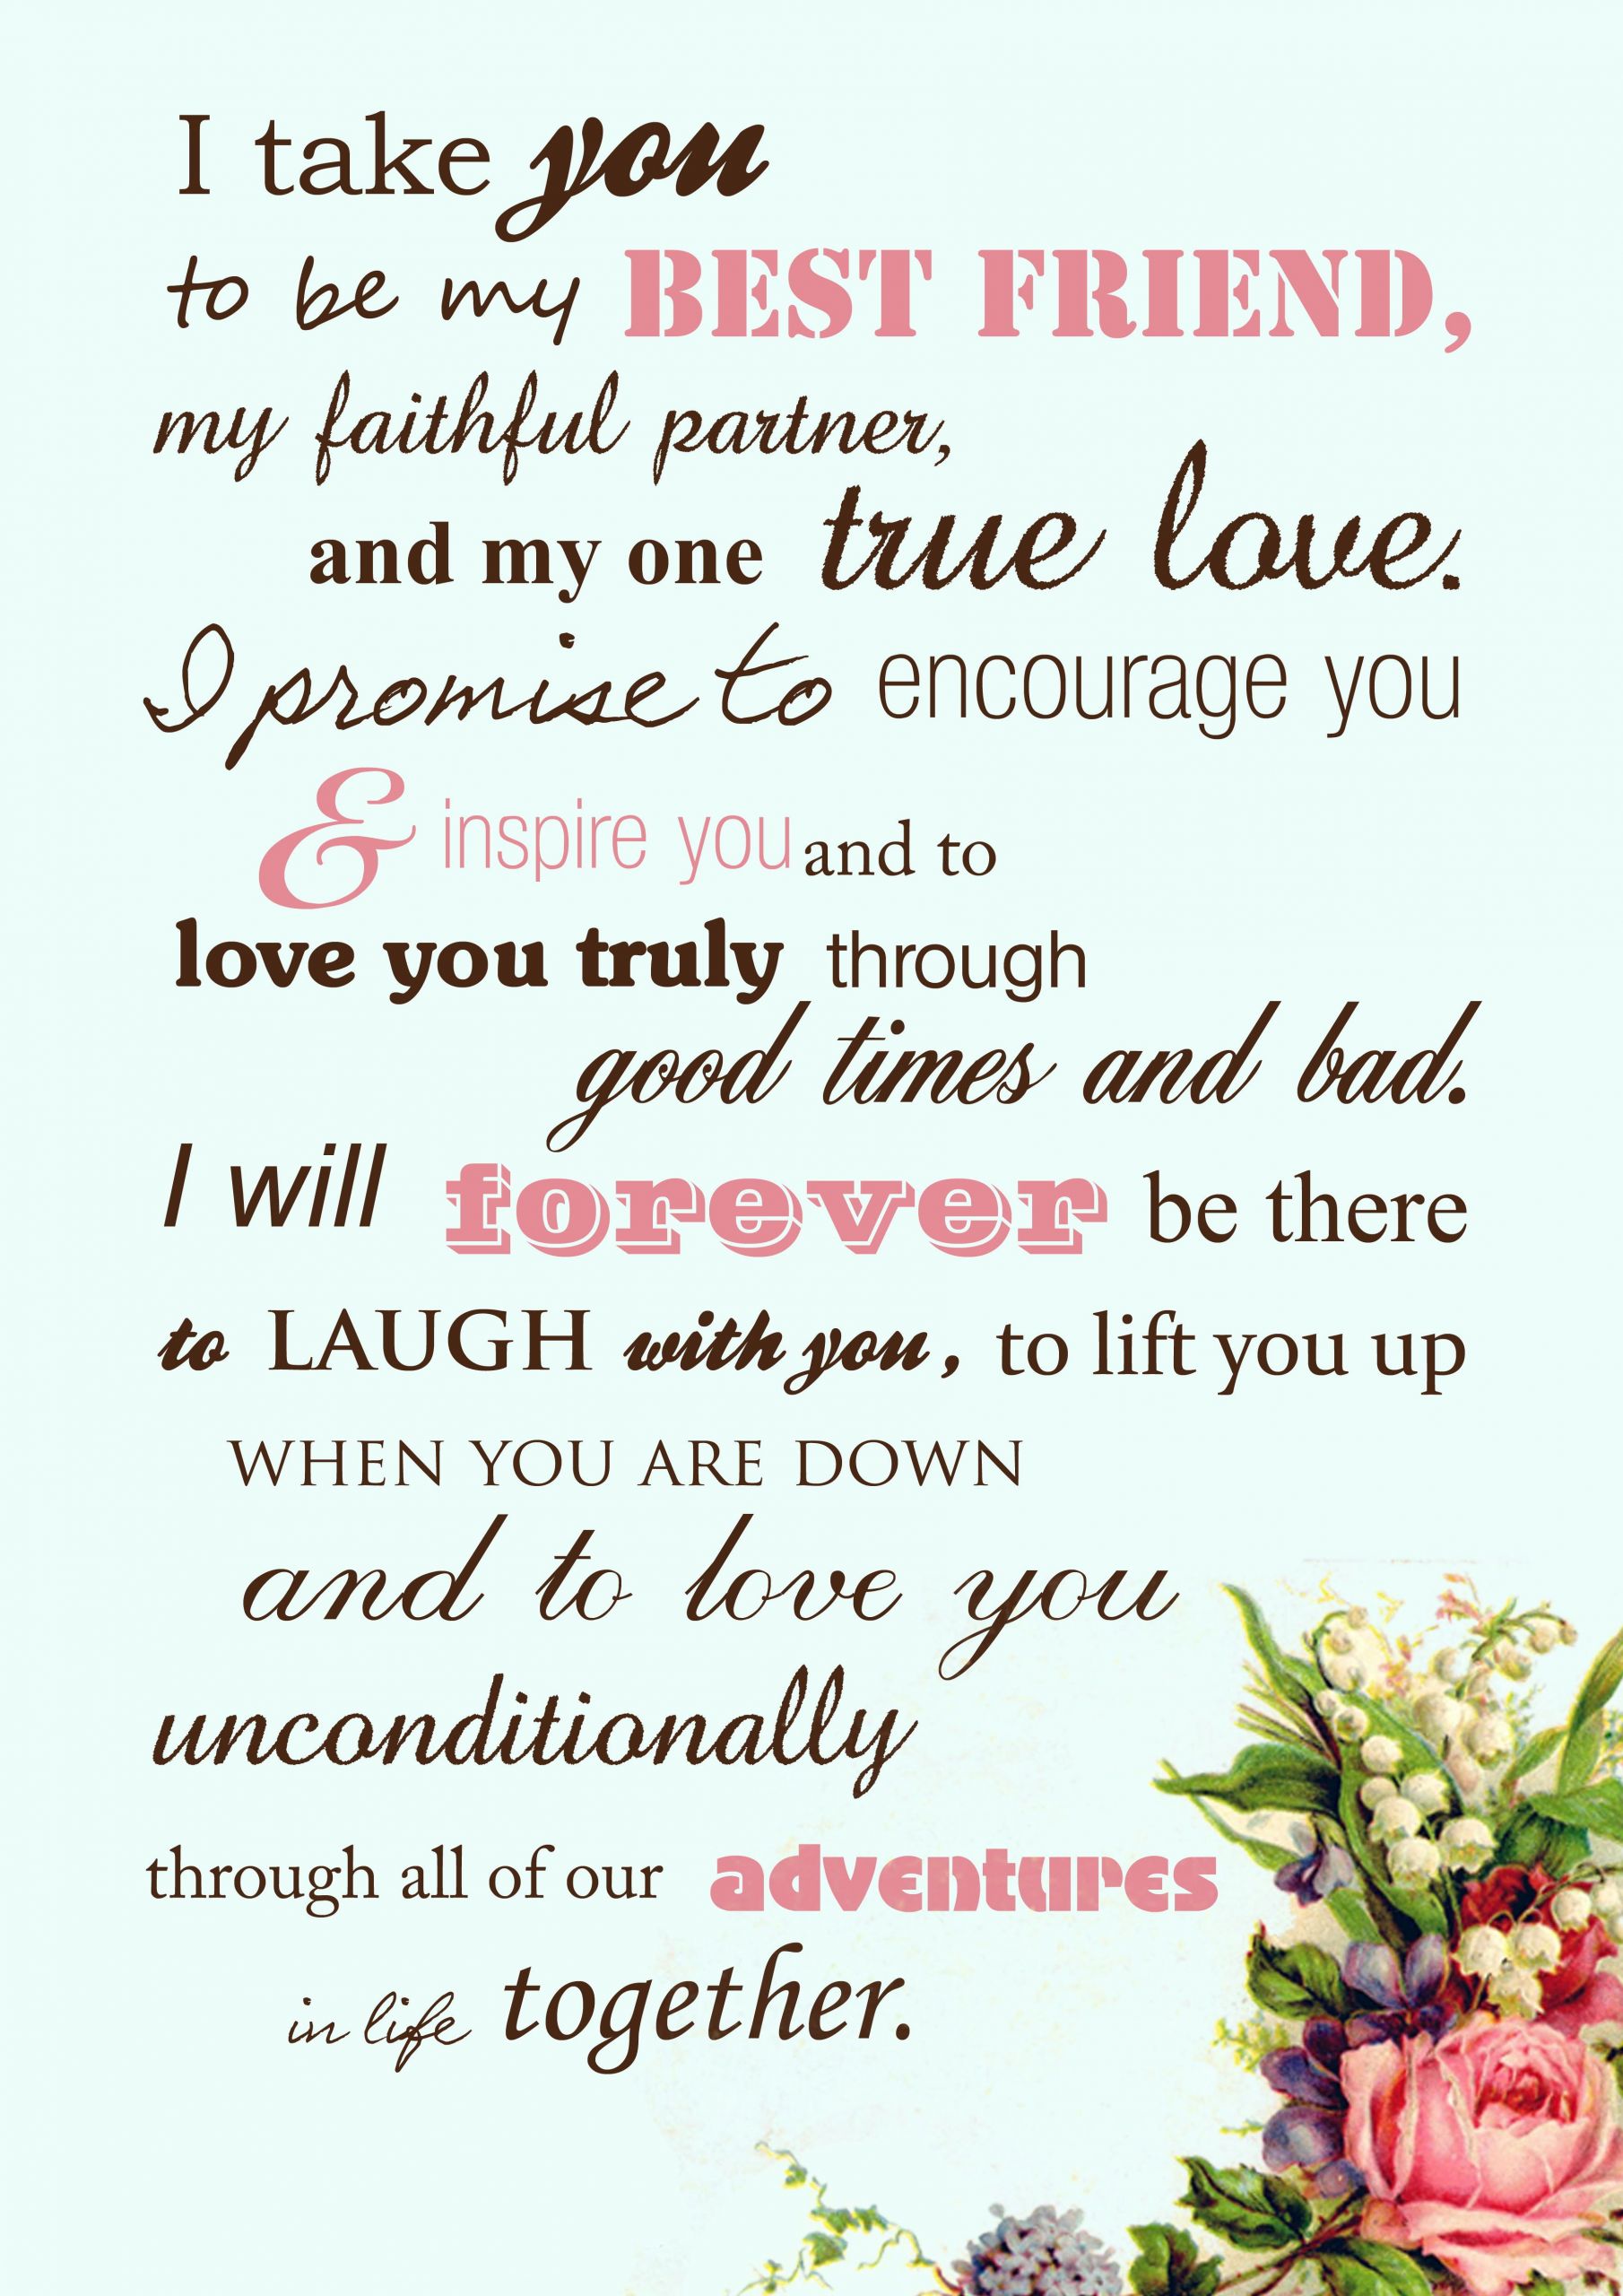 Funny Wedding Vows Samples
 Beautiful wedding vows instead of the traditional by the